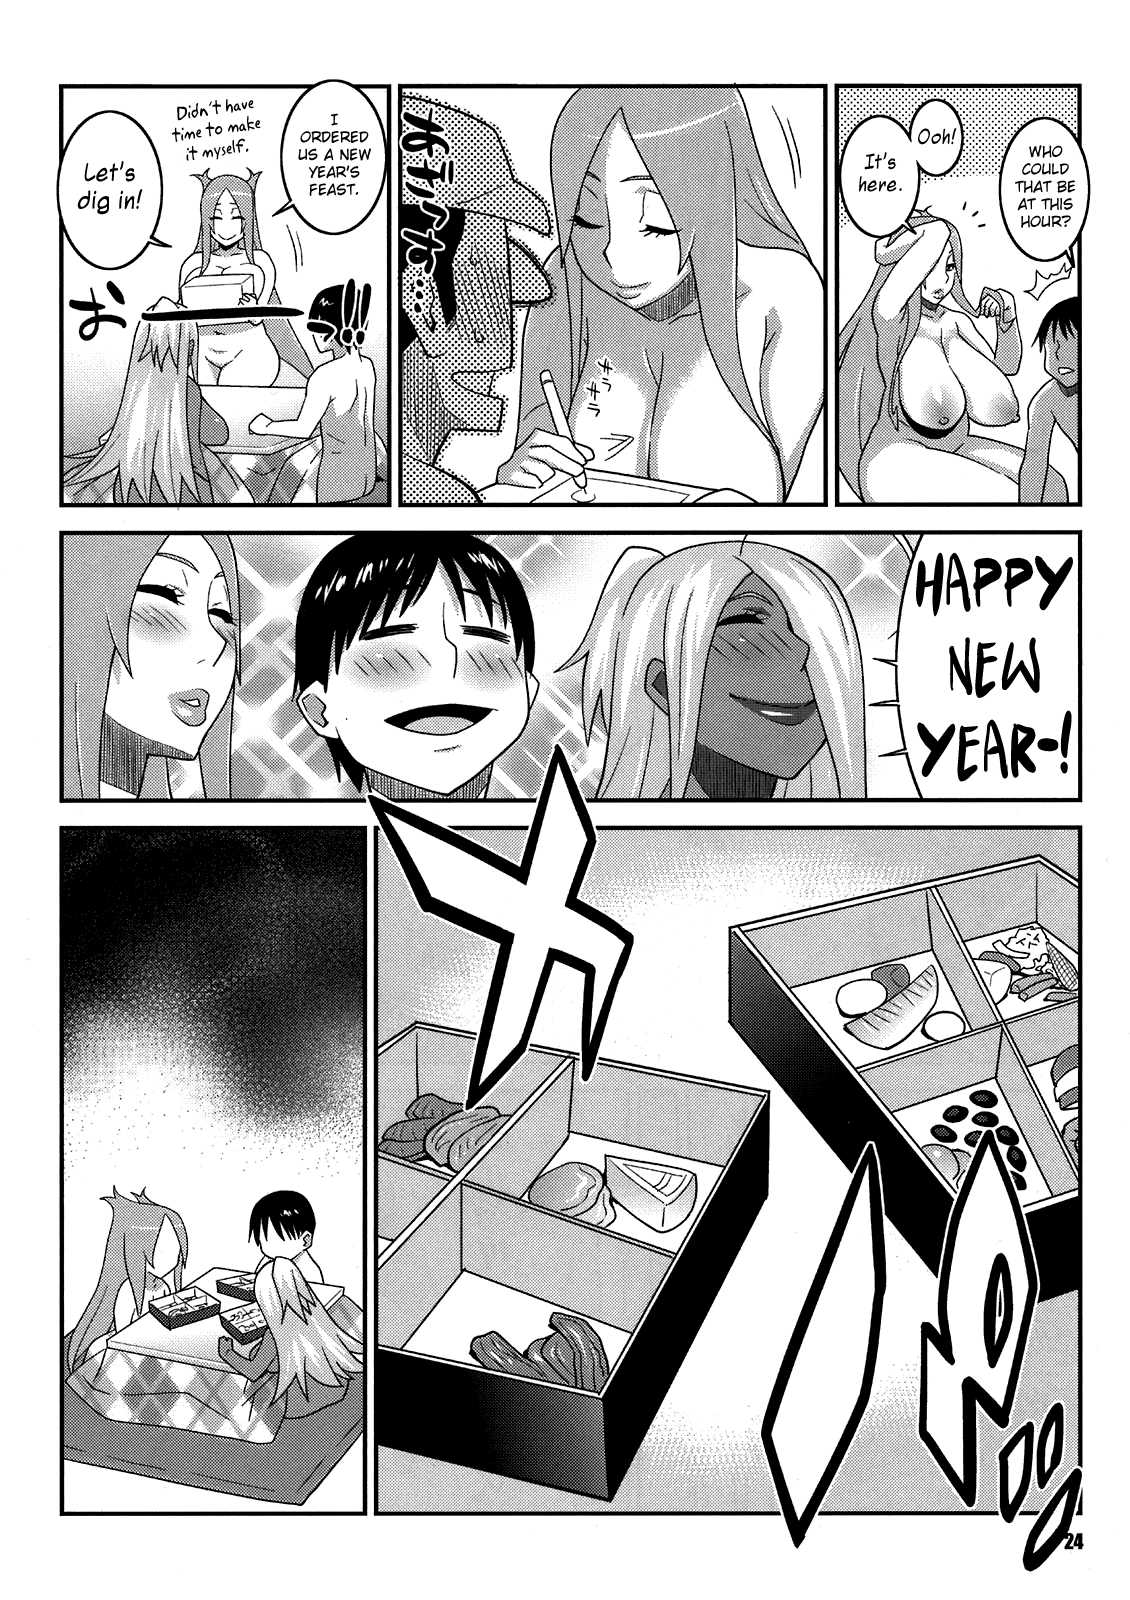 Reading Makina And Garnet S New Year S Eve Sex Party